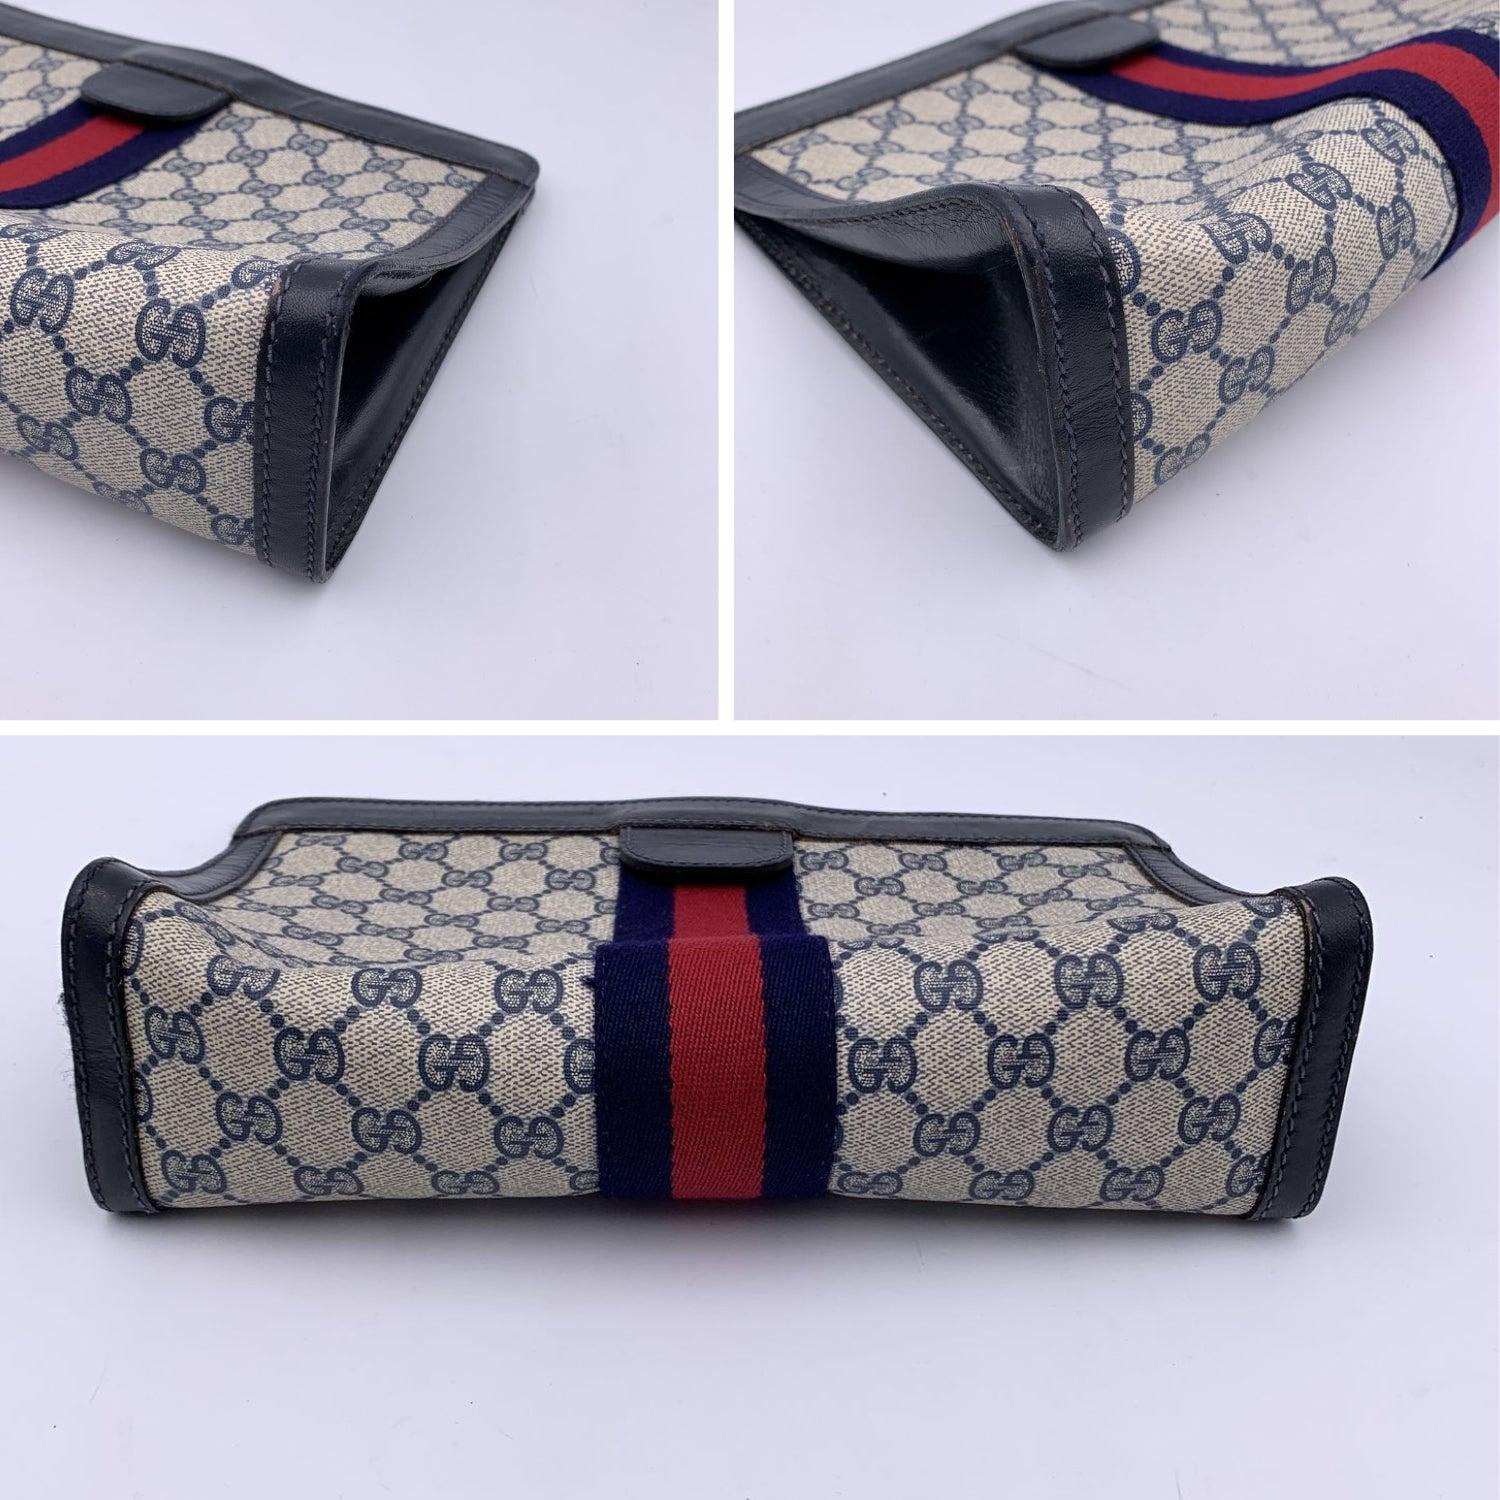 Gucci Vintage Blue Monogram Canvas Cosmetic Bag Clutch Stripes In Good Condition For Sale In Rome, Rome